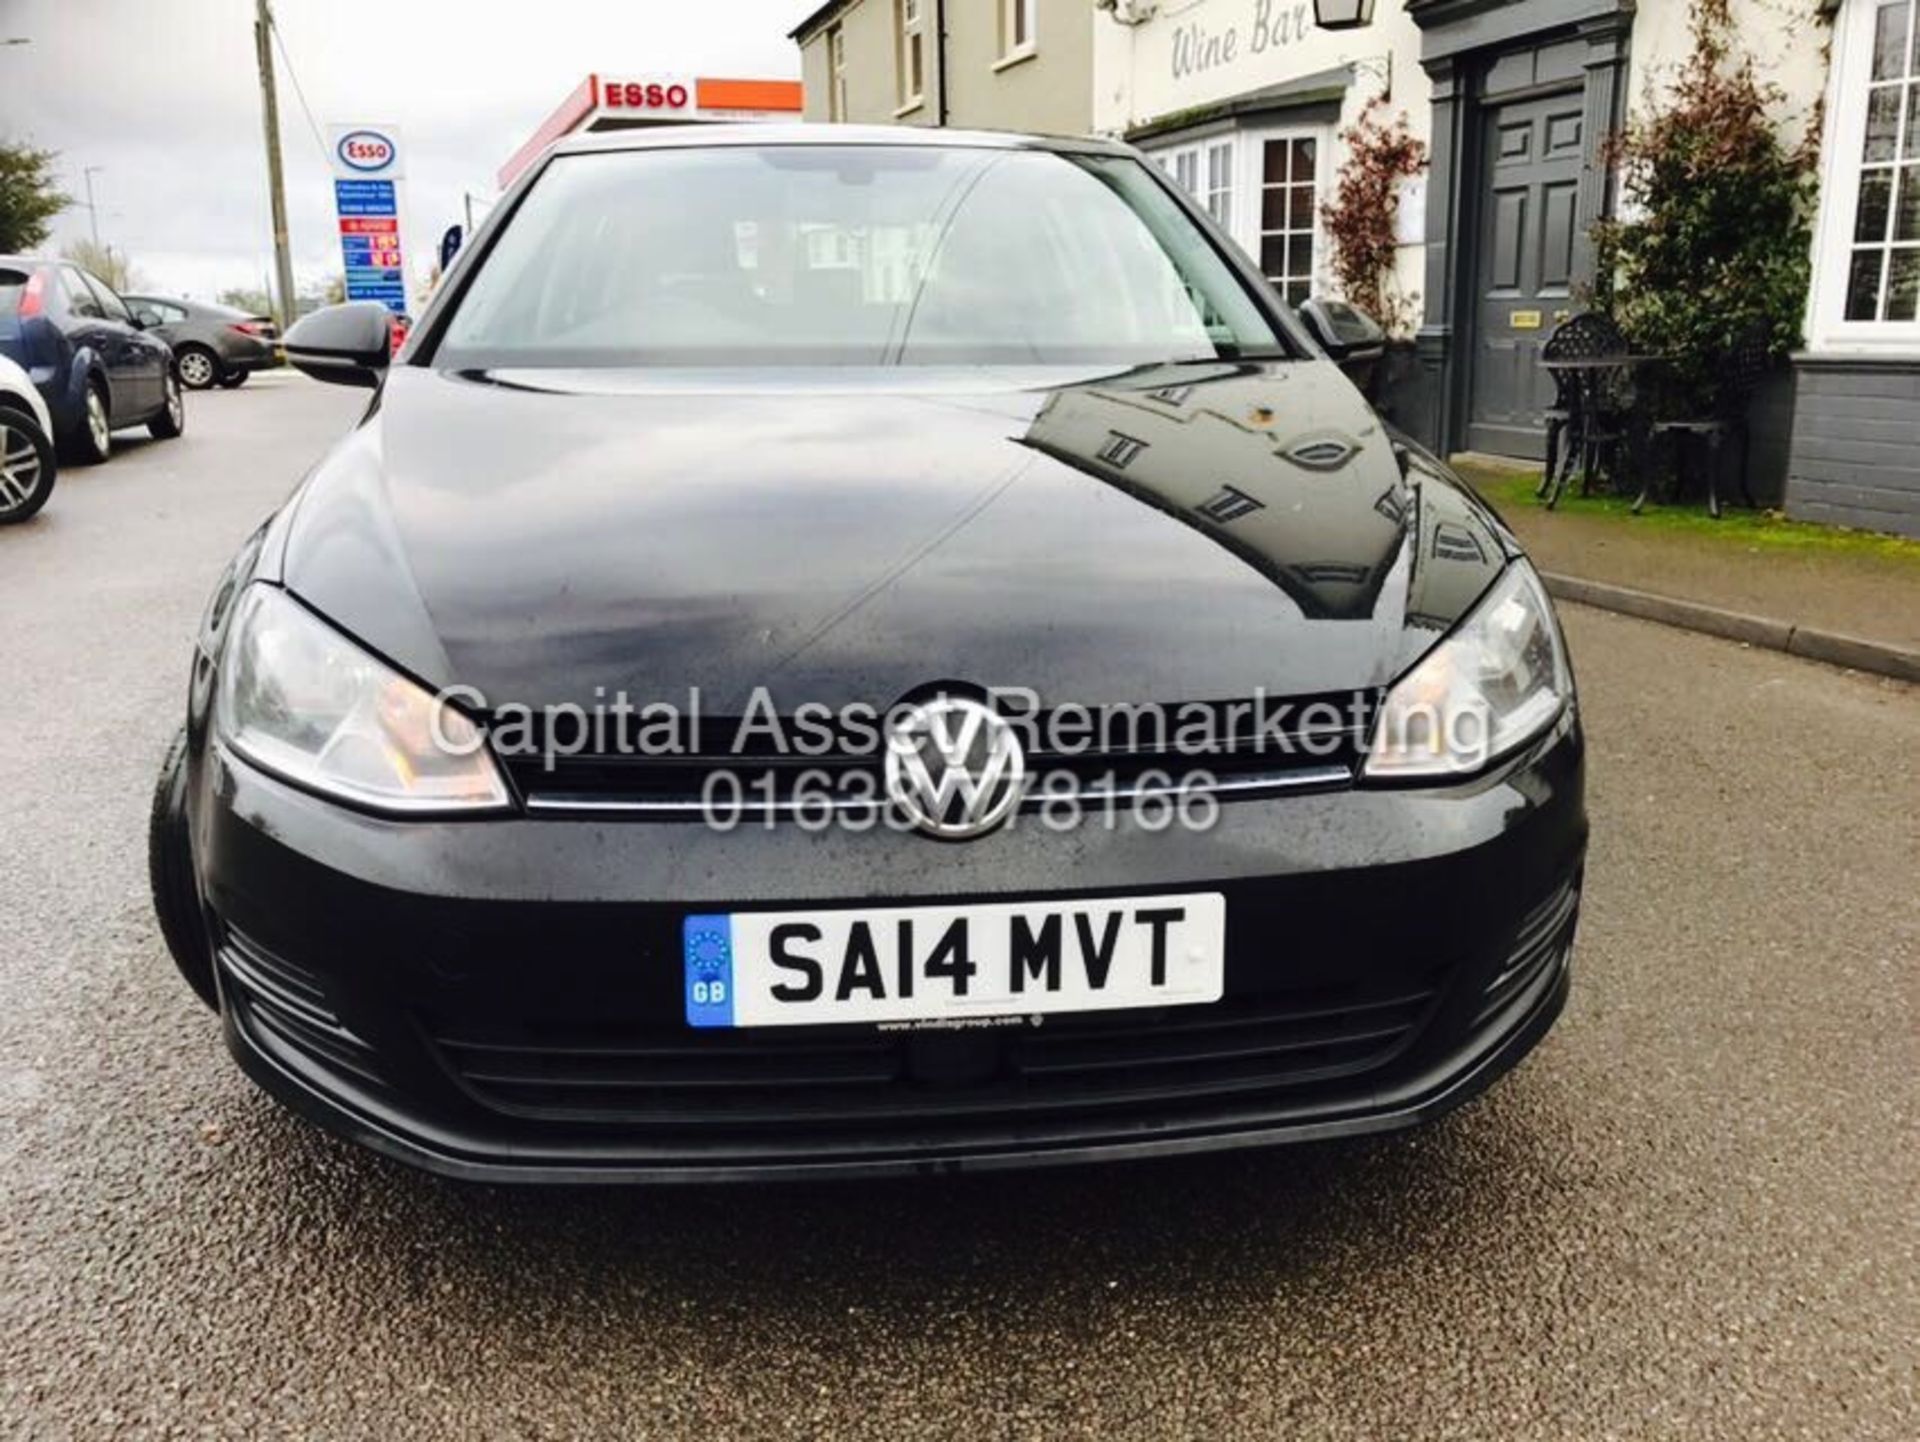 (ON SALE) VOLKSWAGEN GOLF 1.6TDI 7 SPEED DSG "SPECIAL EQUIPMENT" AIR CON - STOP/START-ELECTRIC PACK - Image 2 of 13